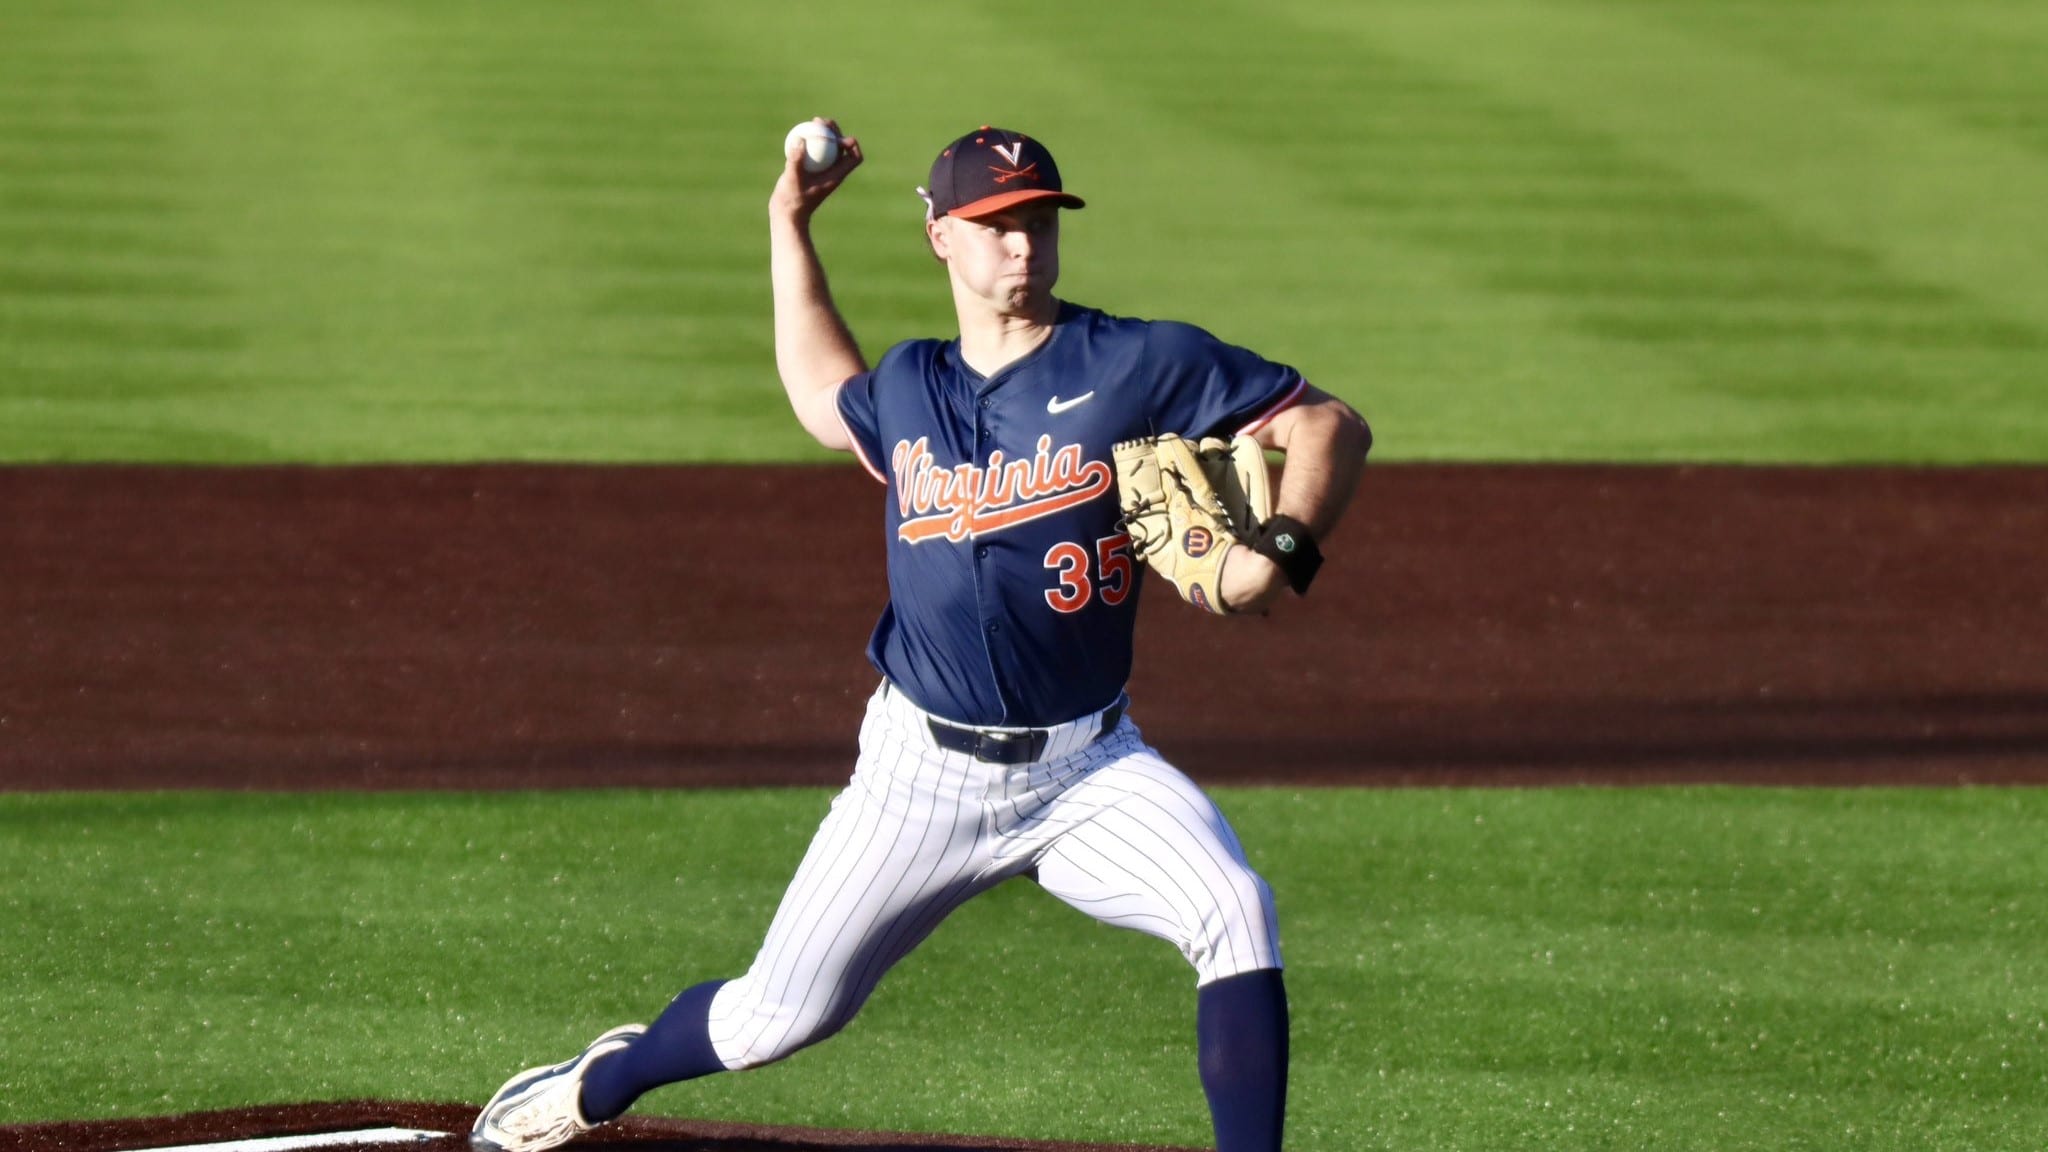 Cullen McKay delivers a pitch during the Virginia baseball game at Duke.